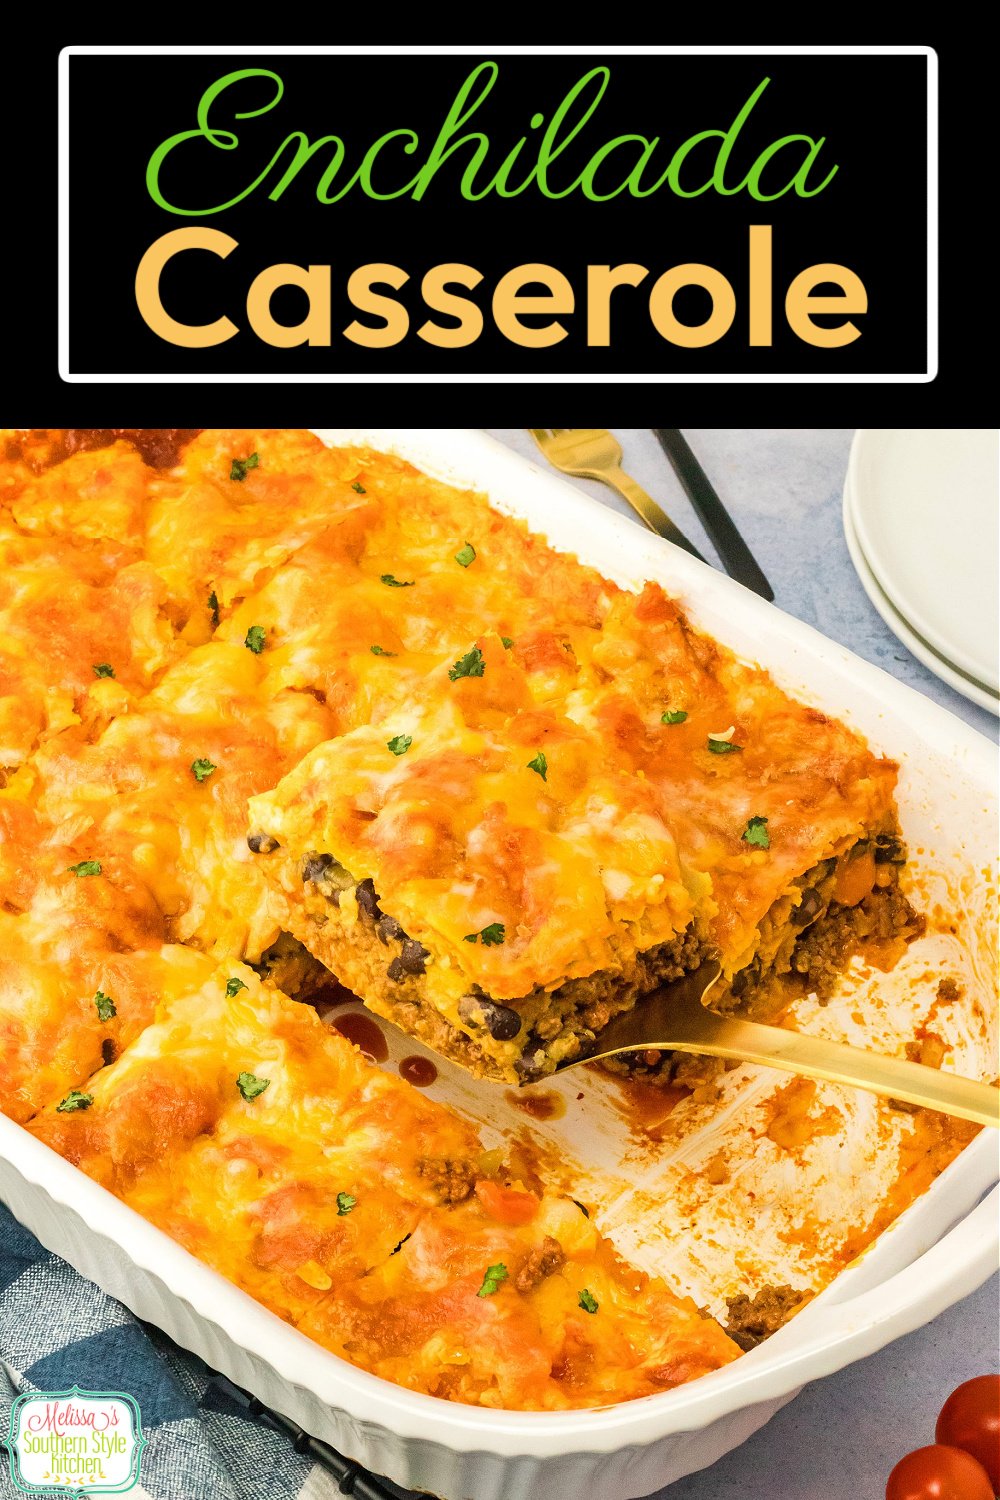 Serve this ground beef Enchilada Casserole recipe with your favorite Mexican inspired side dishes for a delicious fiesta at home. #enchiladas #enchiladacasserole #easycasserolerecipes #casseroles #mexicanrecipes #easygroundbeefrecipes #beefenchiladas via @melissasssk